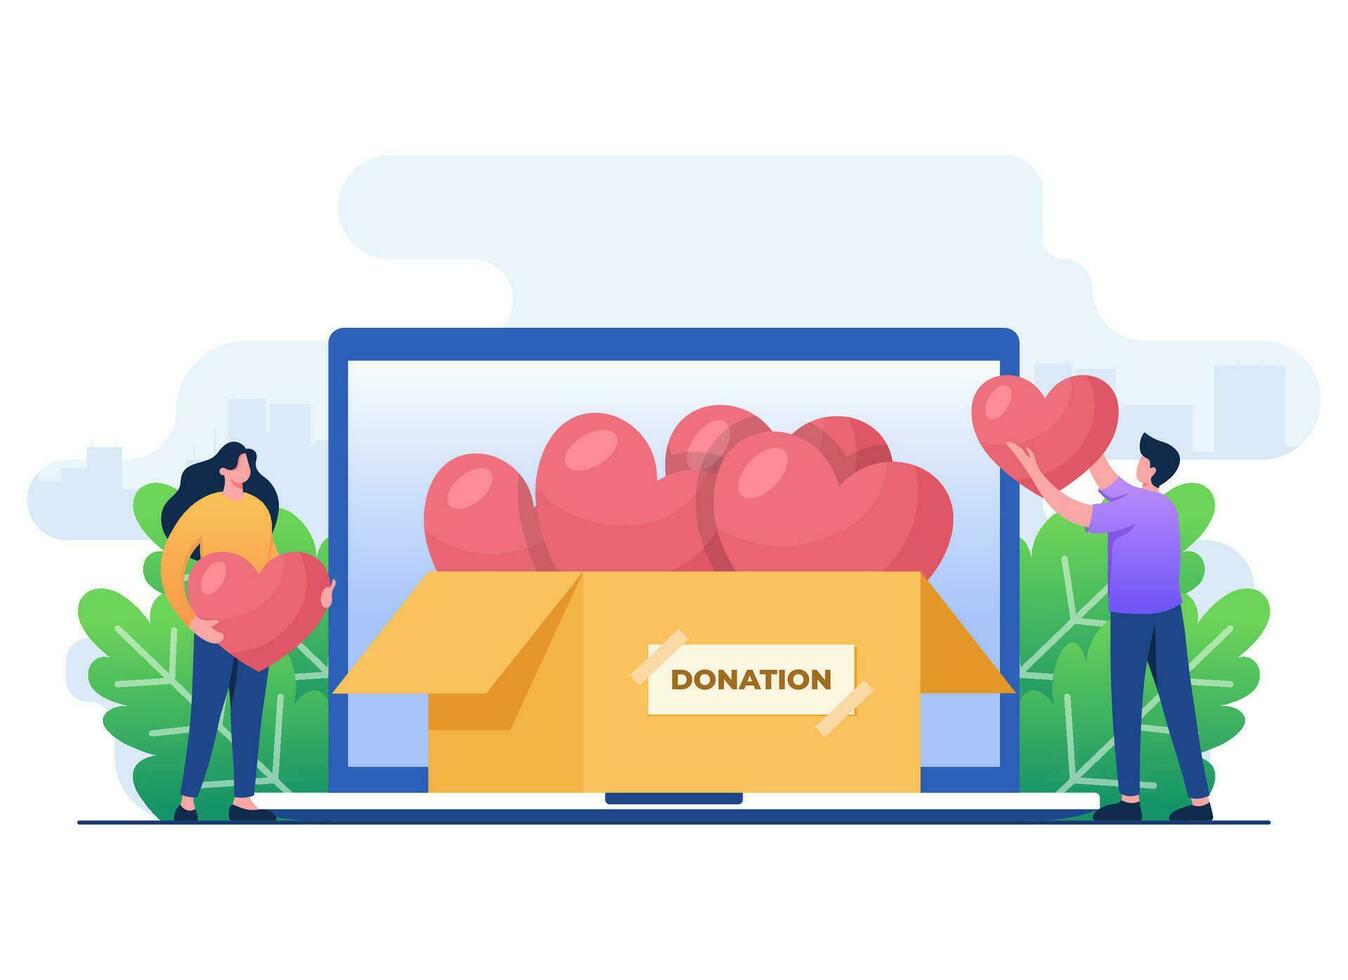 Online donation concept flat illustration concept vector template, Financial support and fundraising concept, Nonprofit organization, Supporting and giving help, Volunteering, Social support